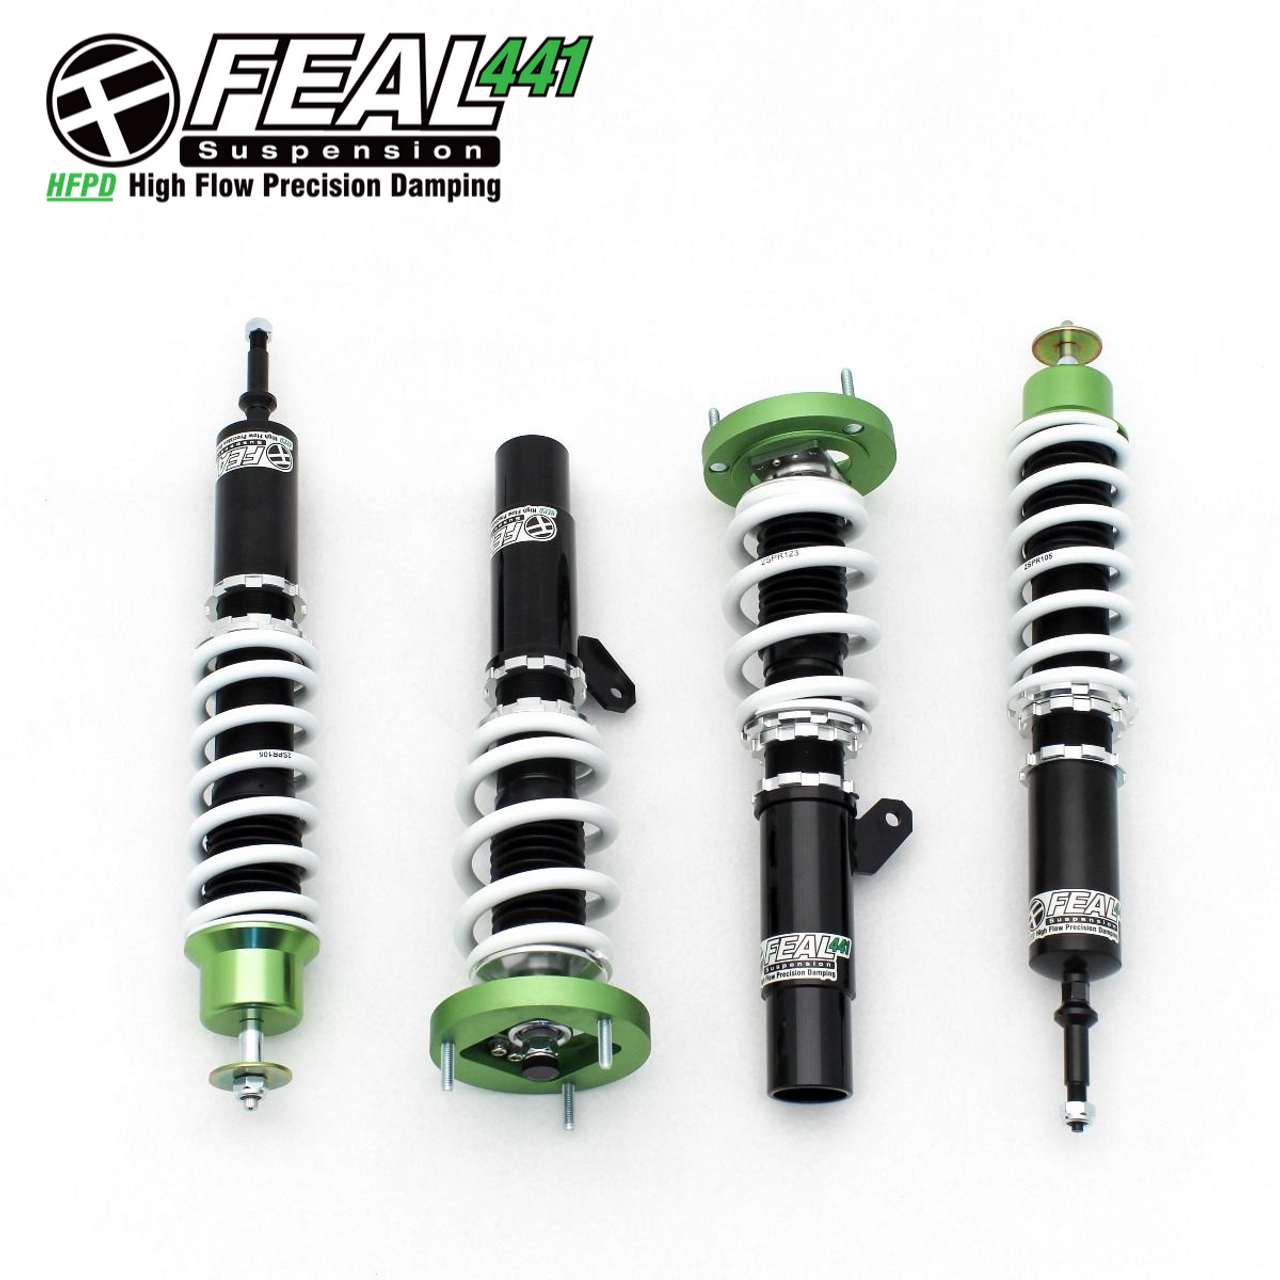 Feal Suspension 441 Coilovers - 2005 - 2013 BMW 3 Series (E90) AWD